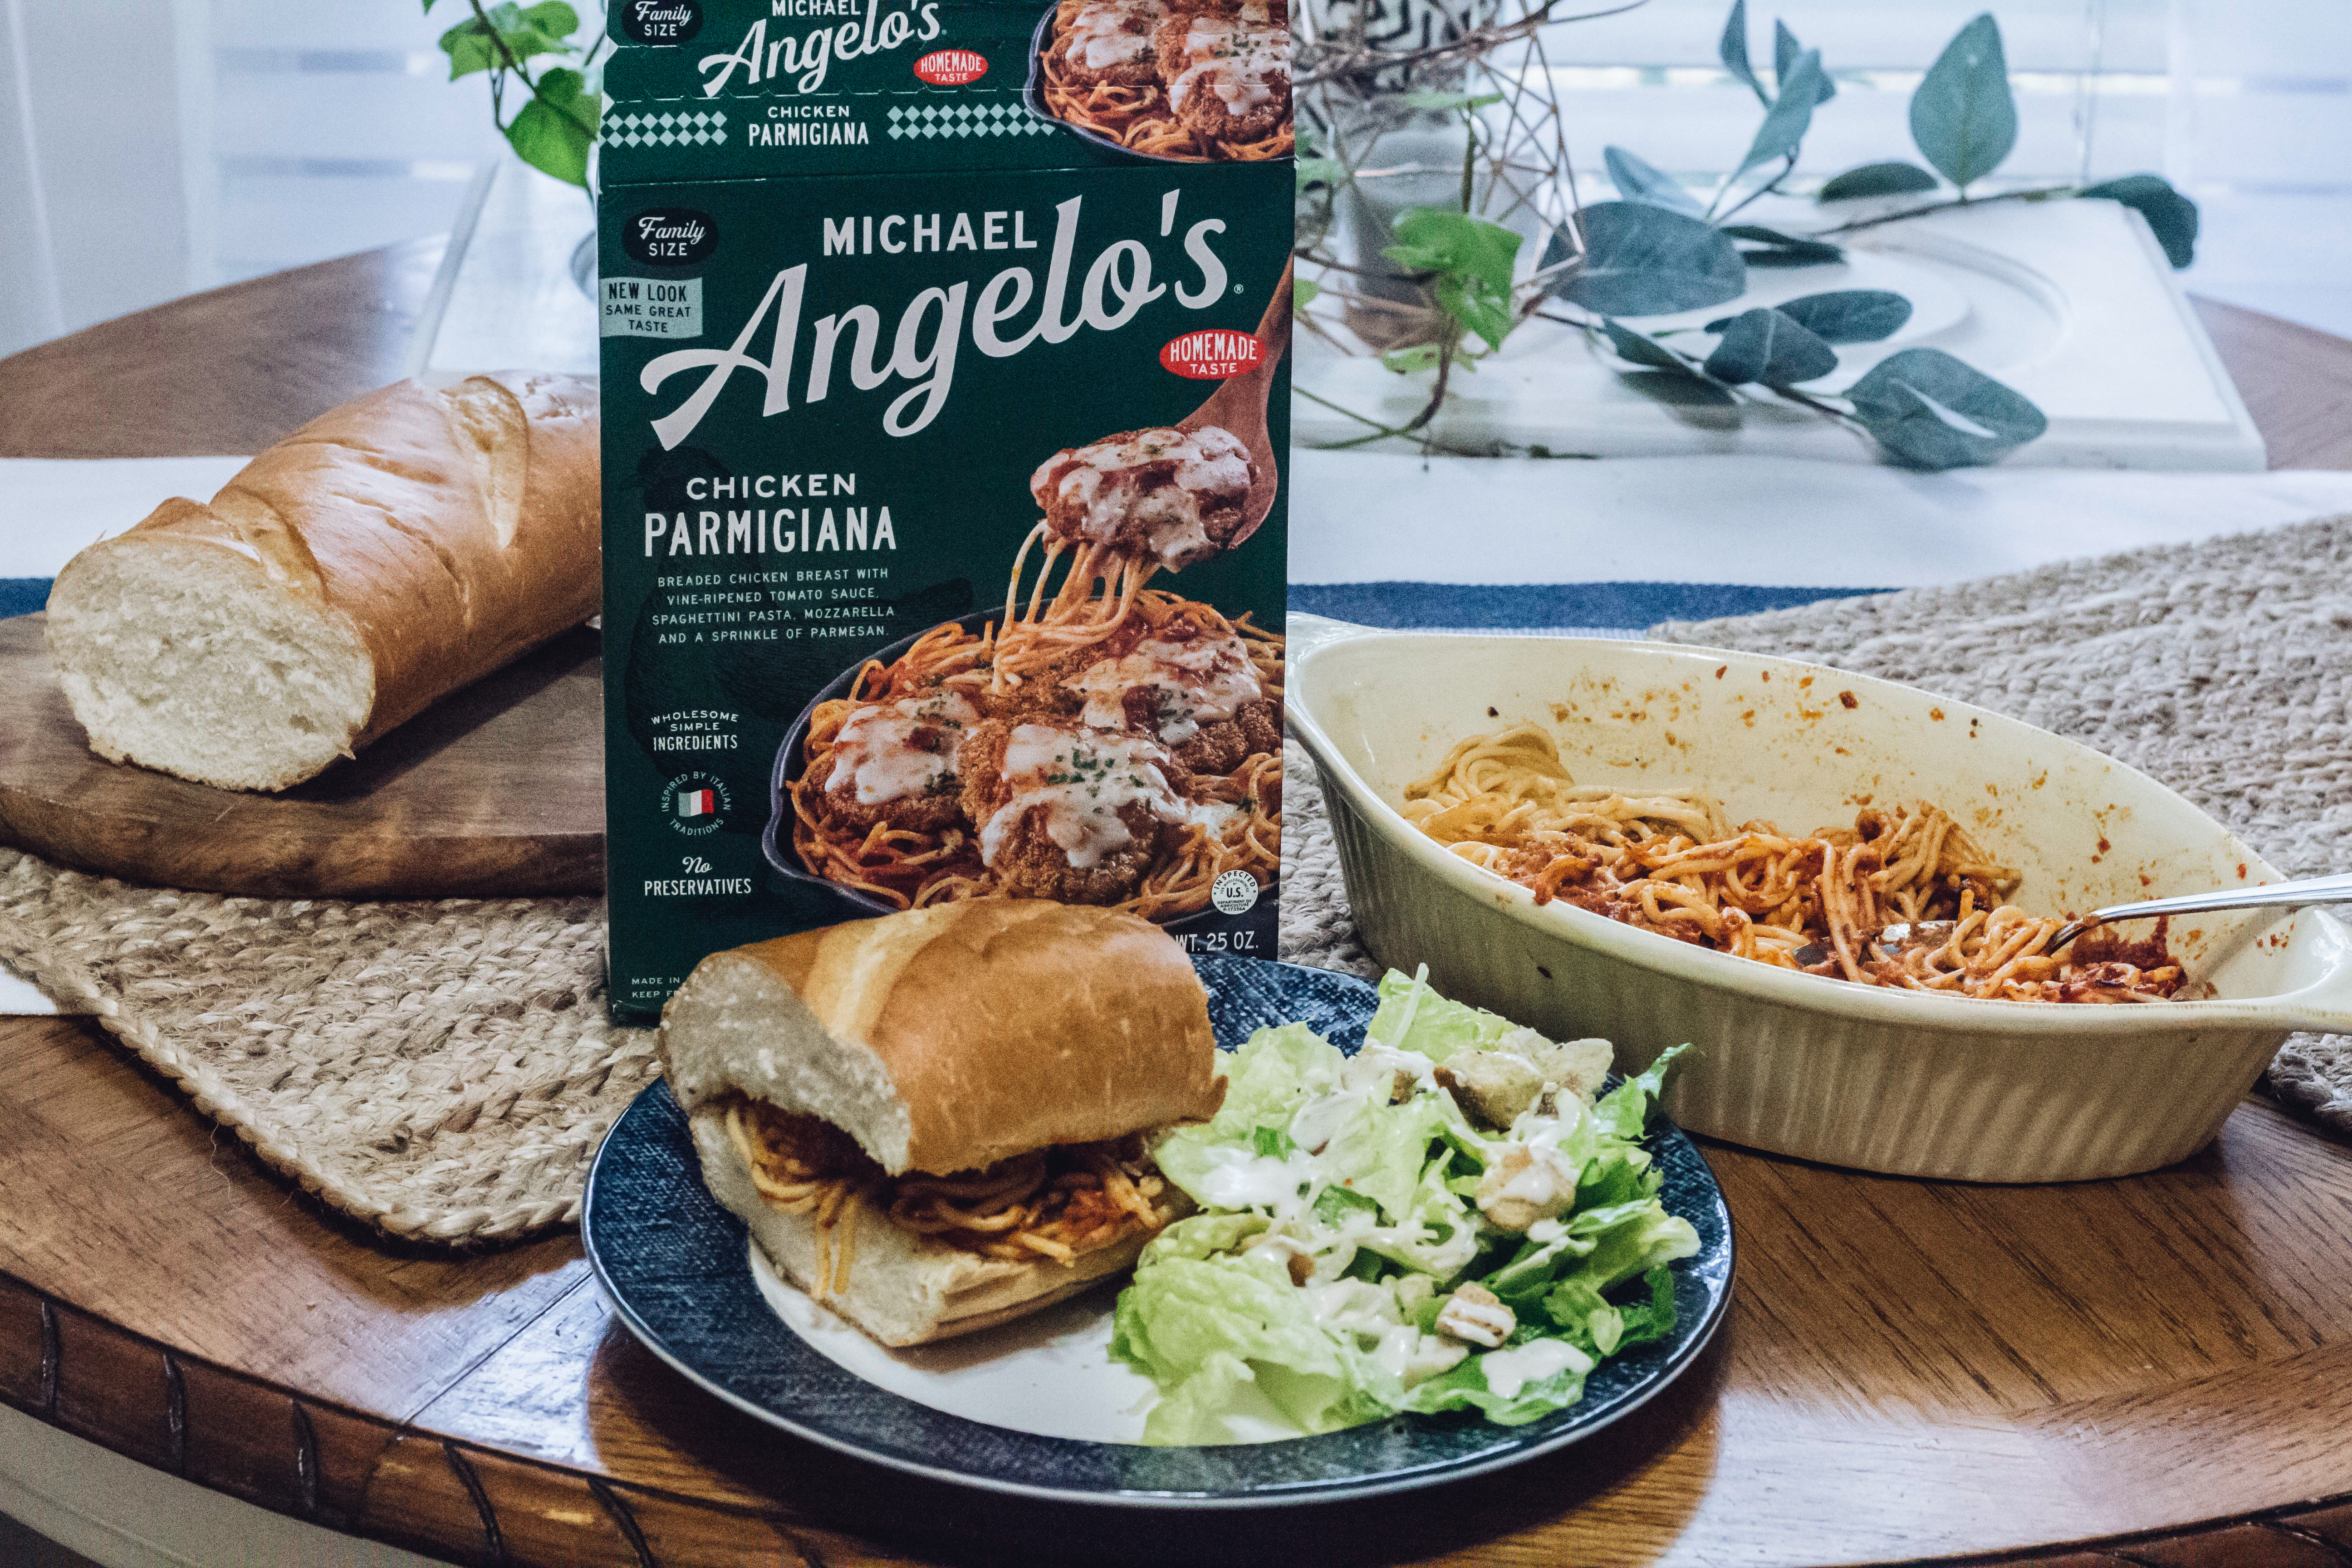 Easy Chicken Parmigiana Sandwiches with Michael Angelo's